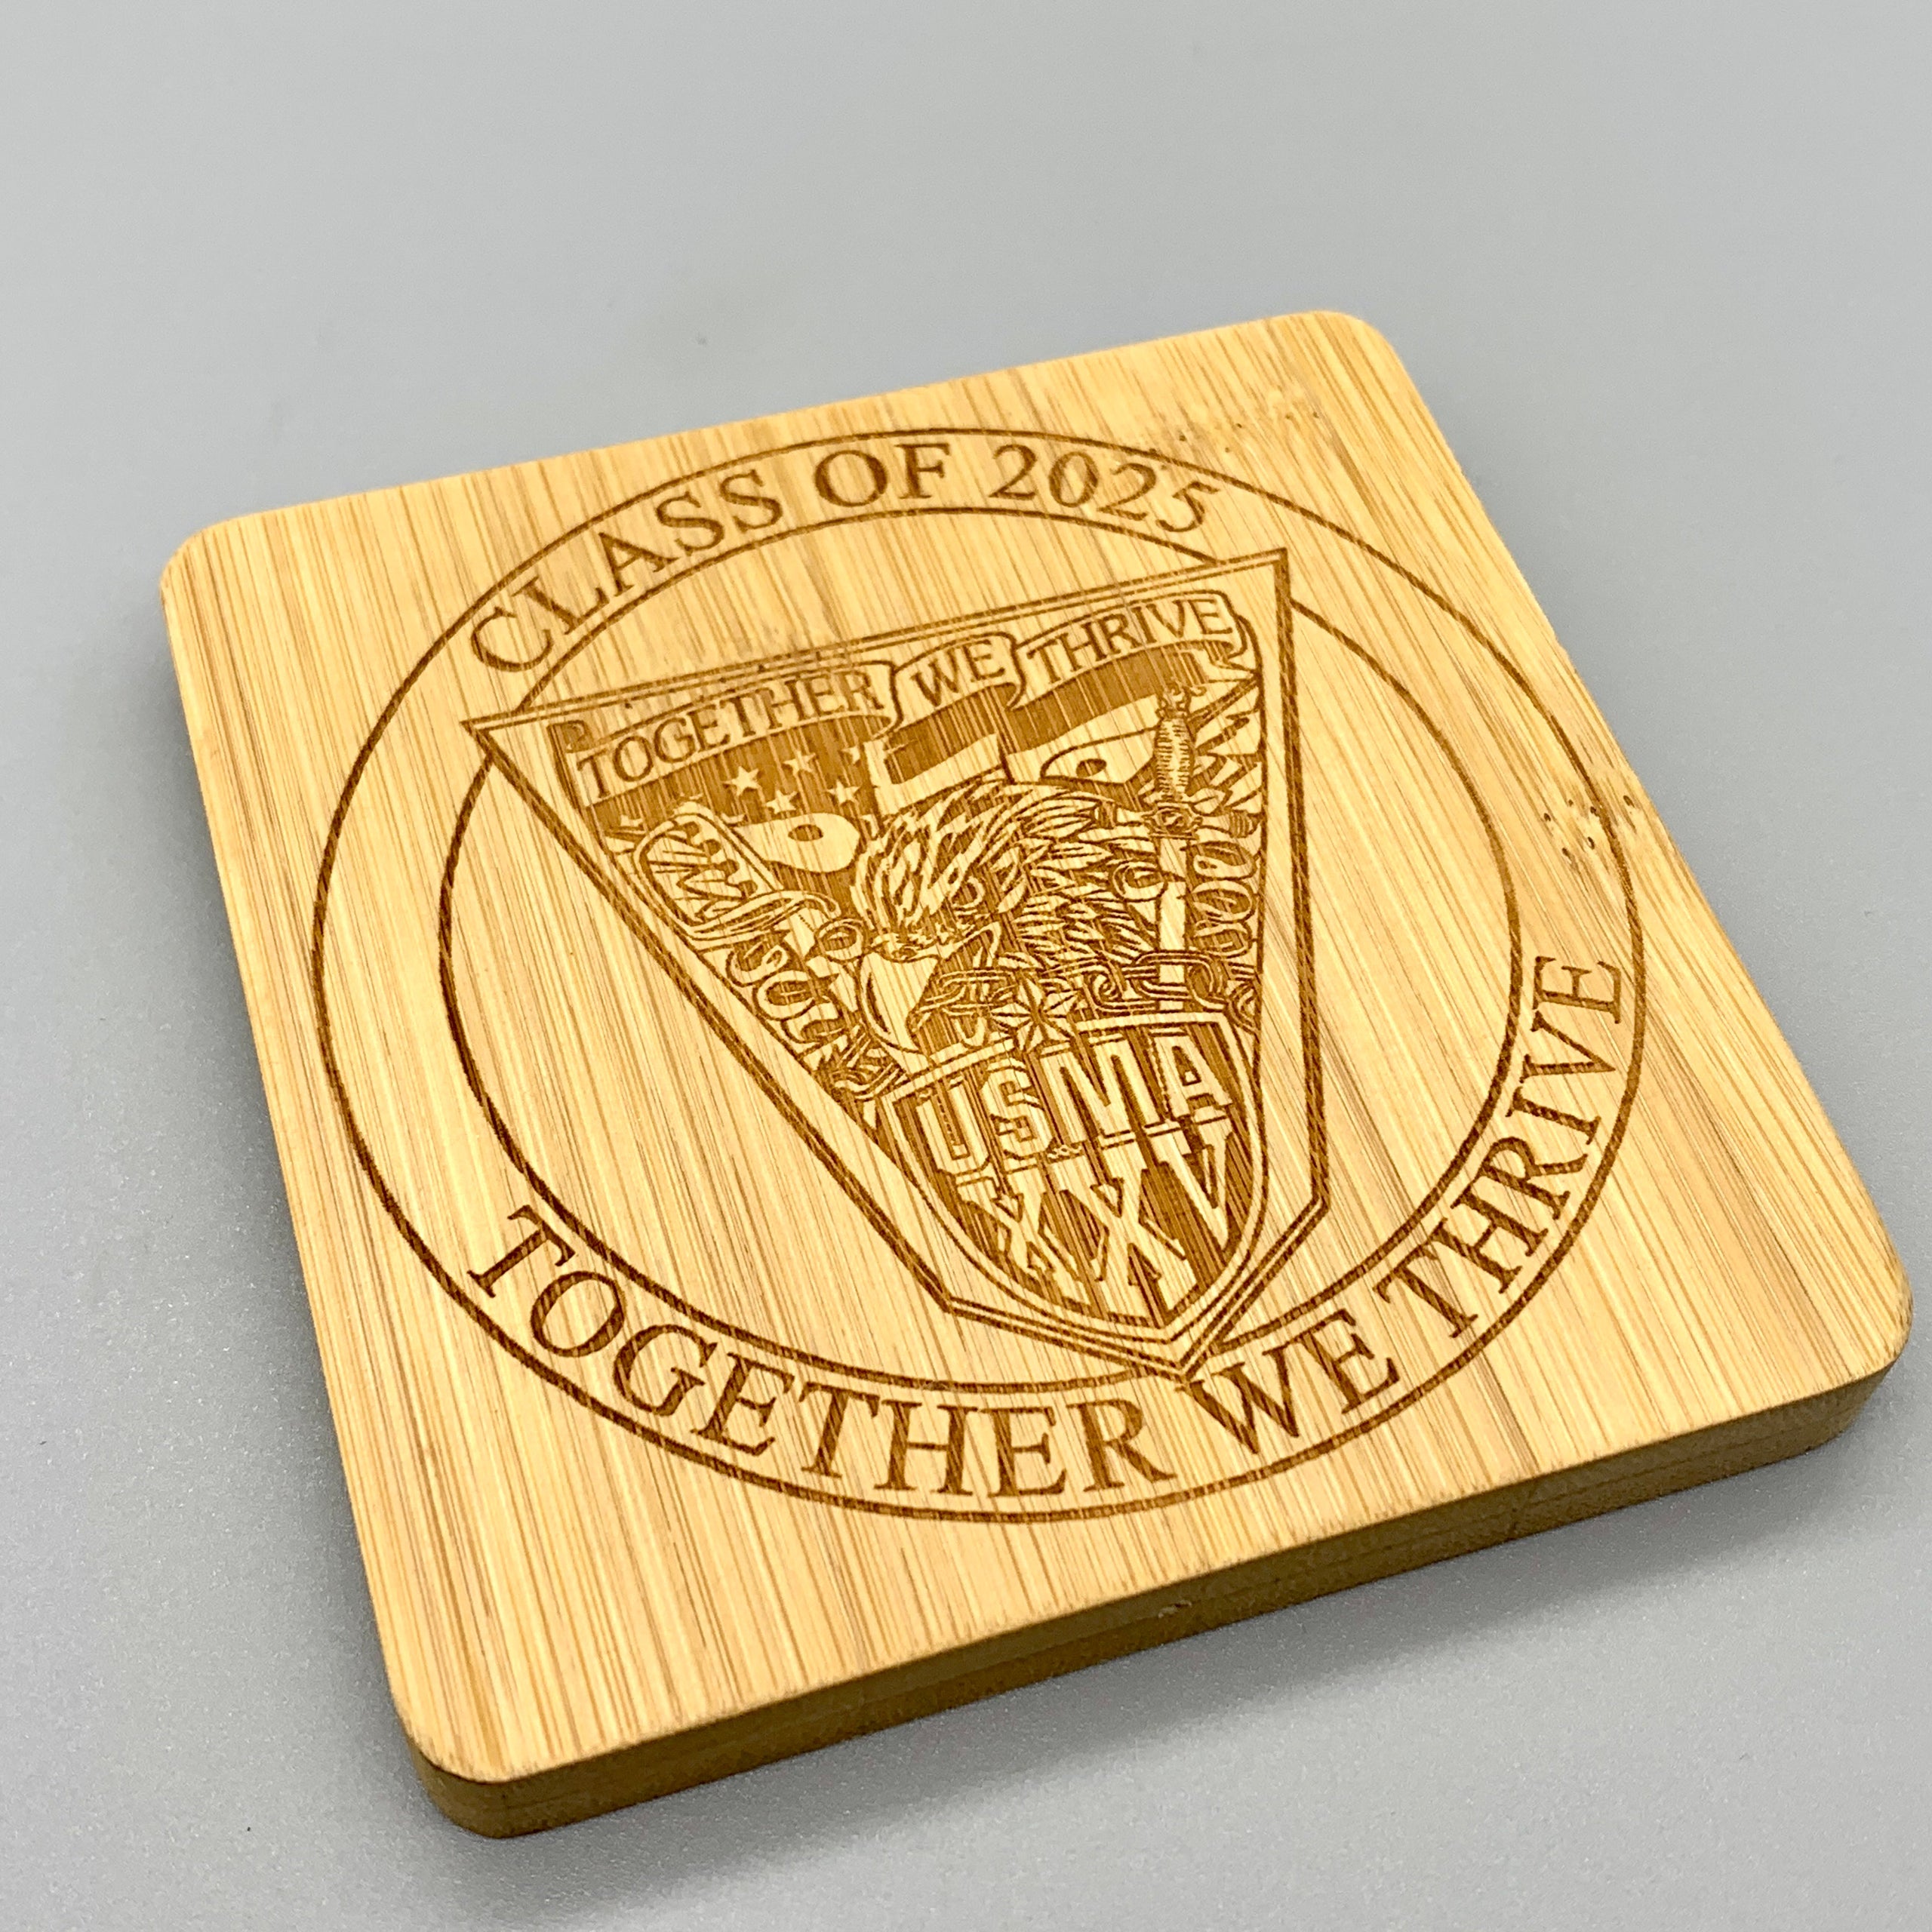 coaster-2025-individual-west-point-class-of-2025-crest-and-motto-bamboo-coaster-west-point